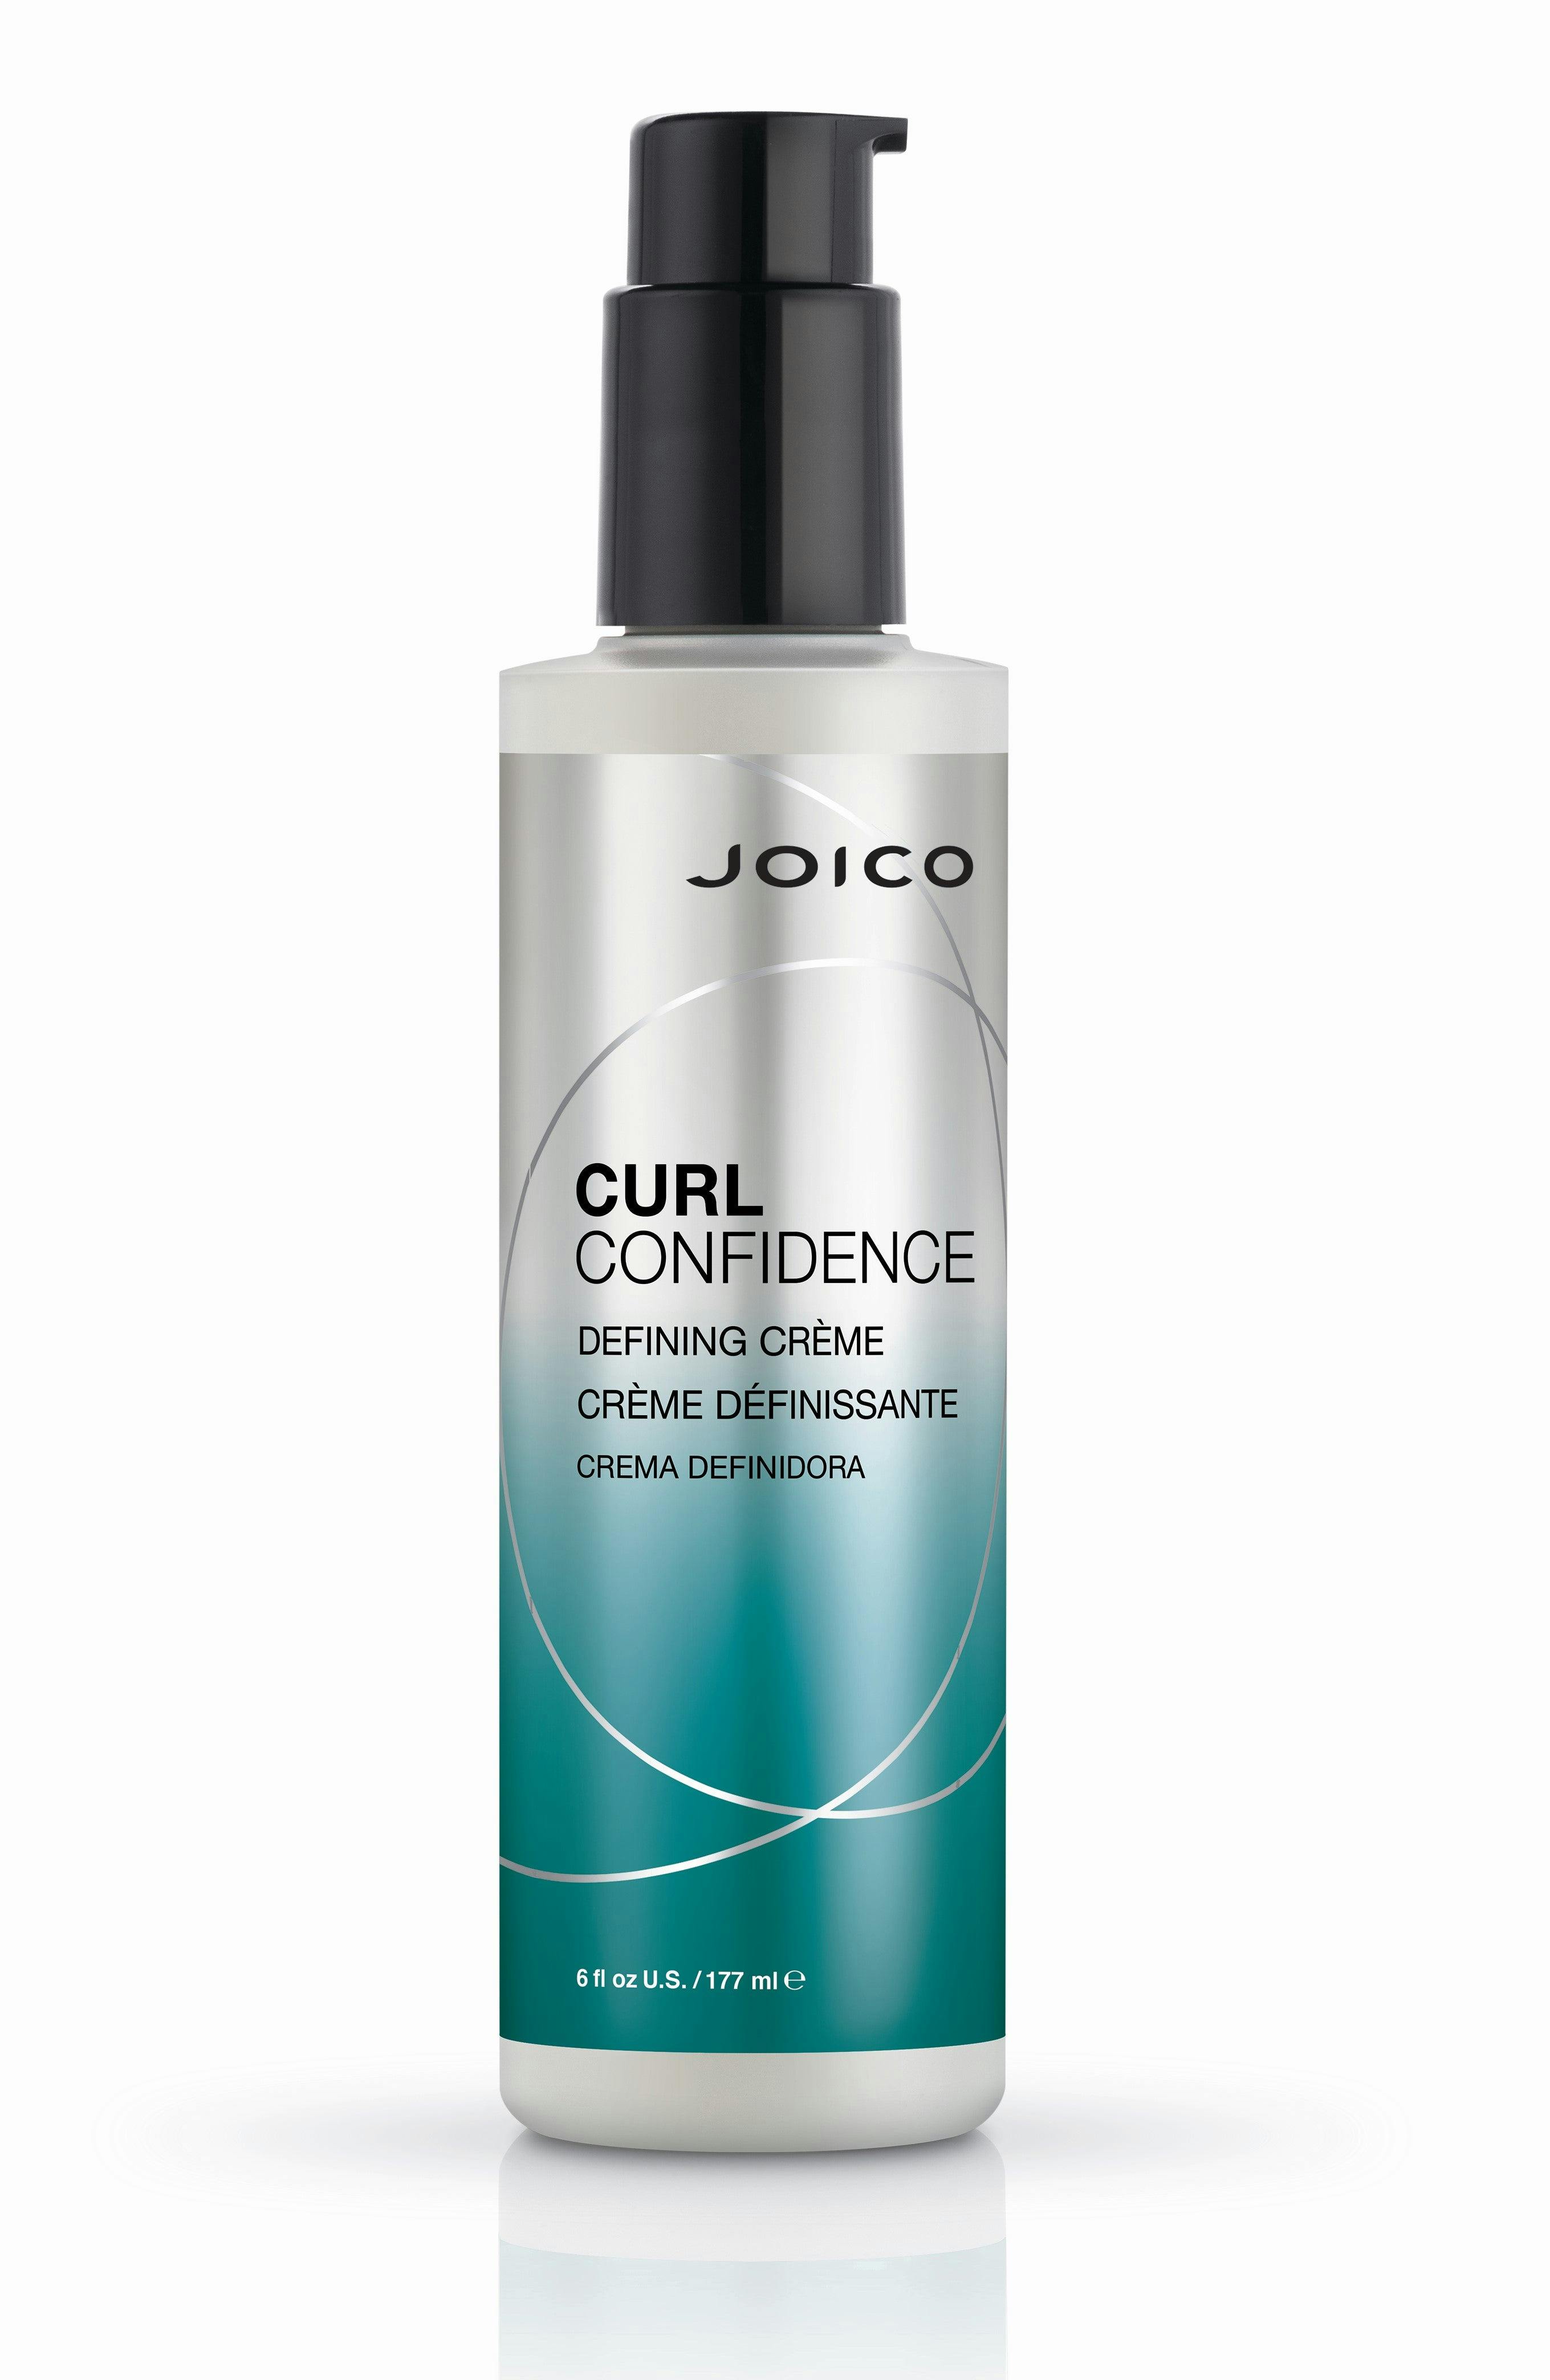 Joico Curl Confidence Defining Creme 177ml